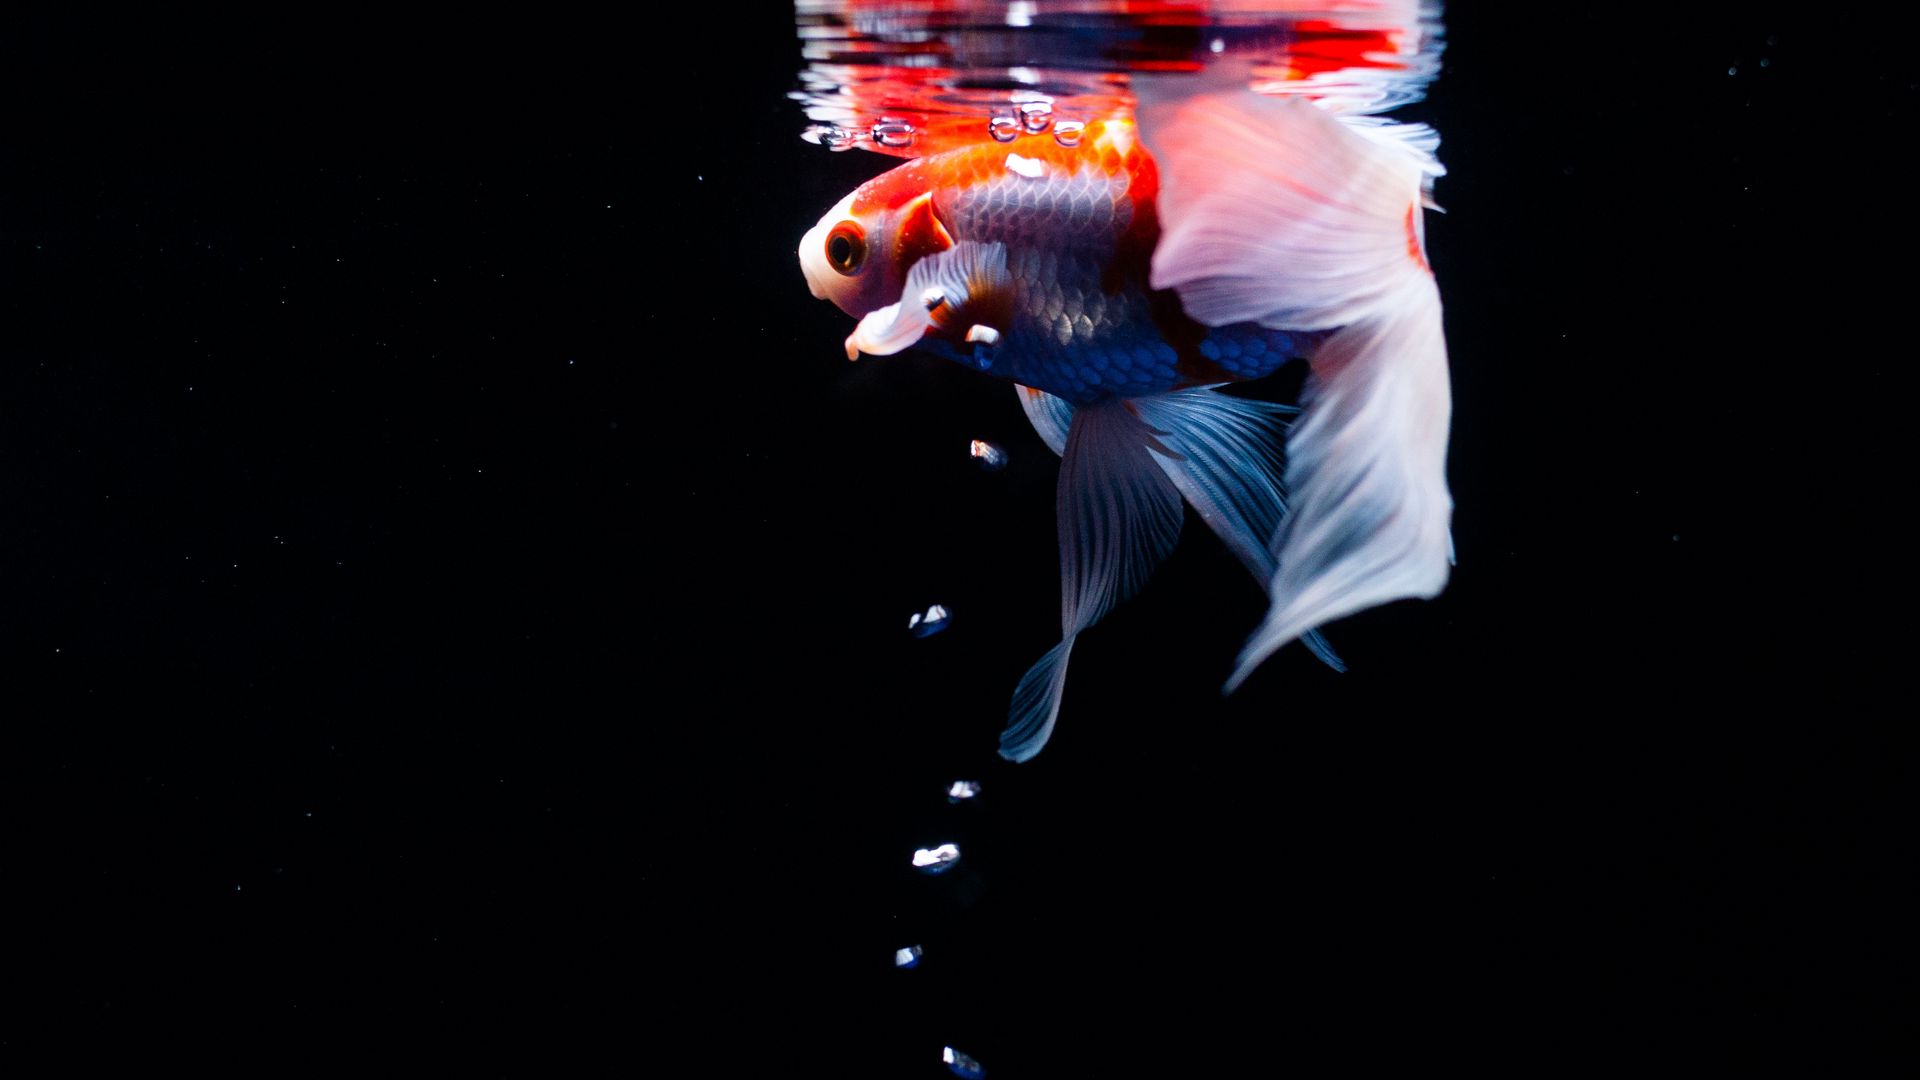 Download wallpaper 1920x1080 koi, carp, fish, tail, fins, water, under water,  bubbles full hd, hdtv, fhd, 1080p hd background